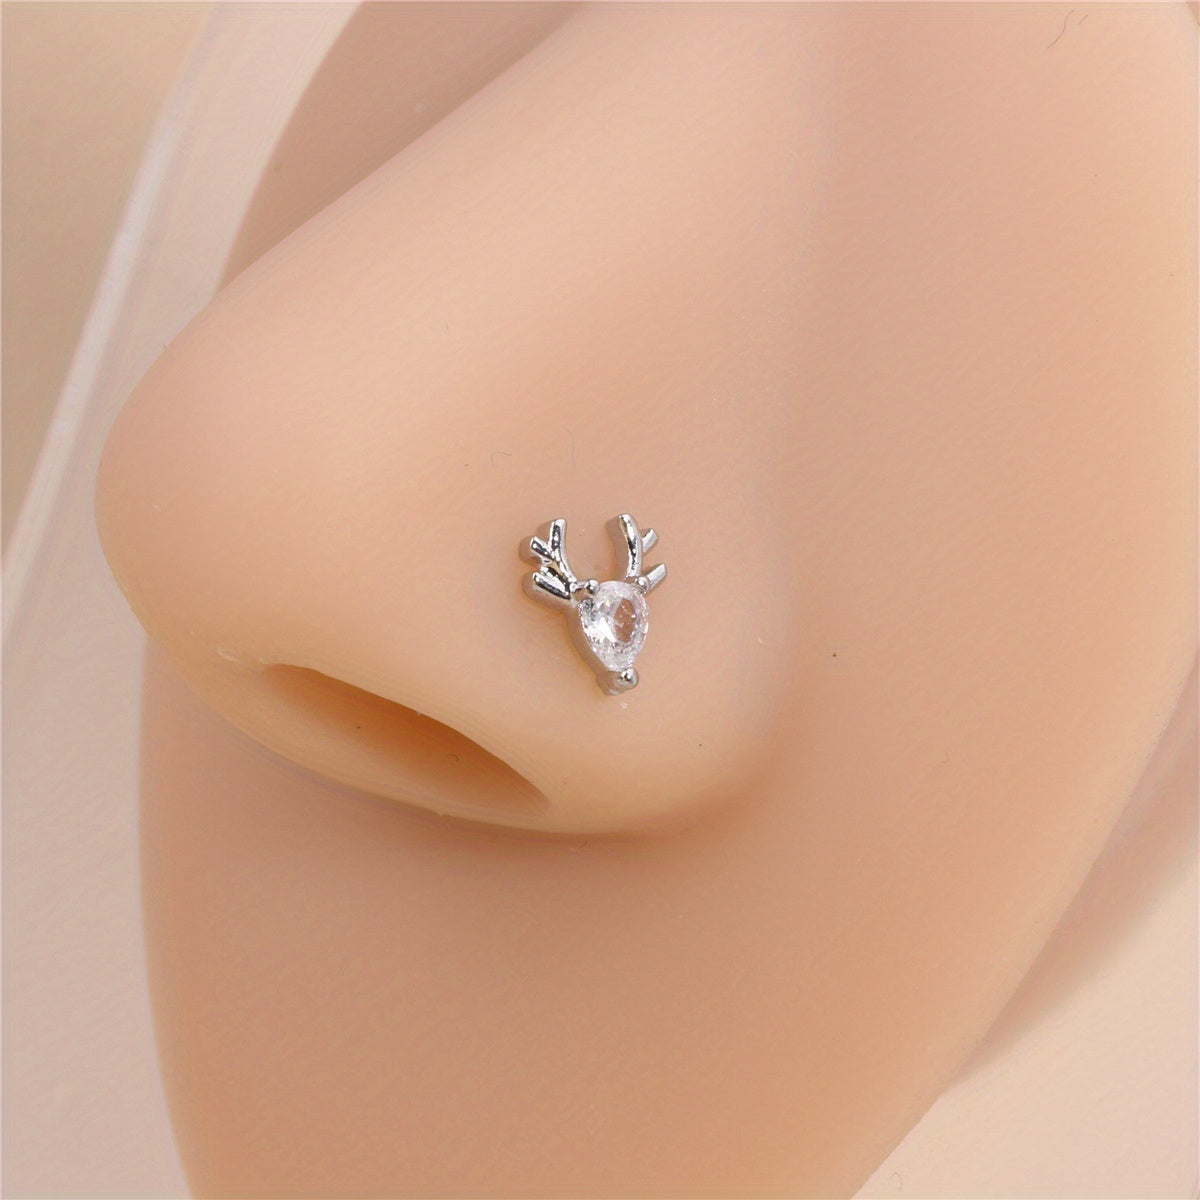 1Pcs Elk Shape Nose Ring Inlaid Cubic Zirconia L Shaped Nose Ring Stud For Women Festival Gift Body Piercing Jewelry